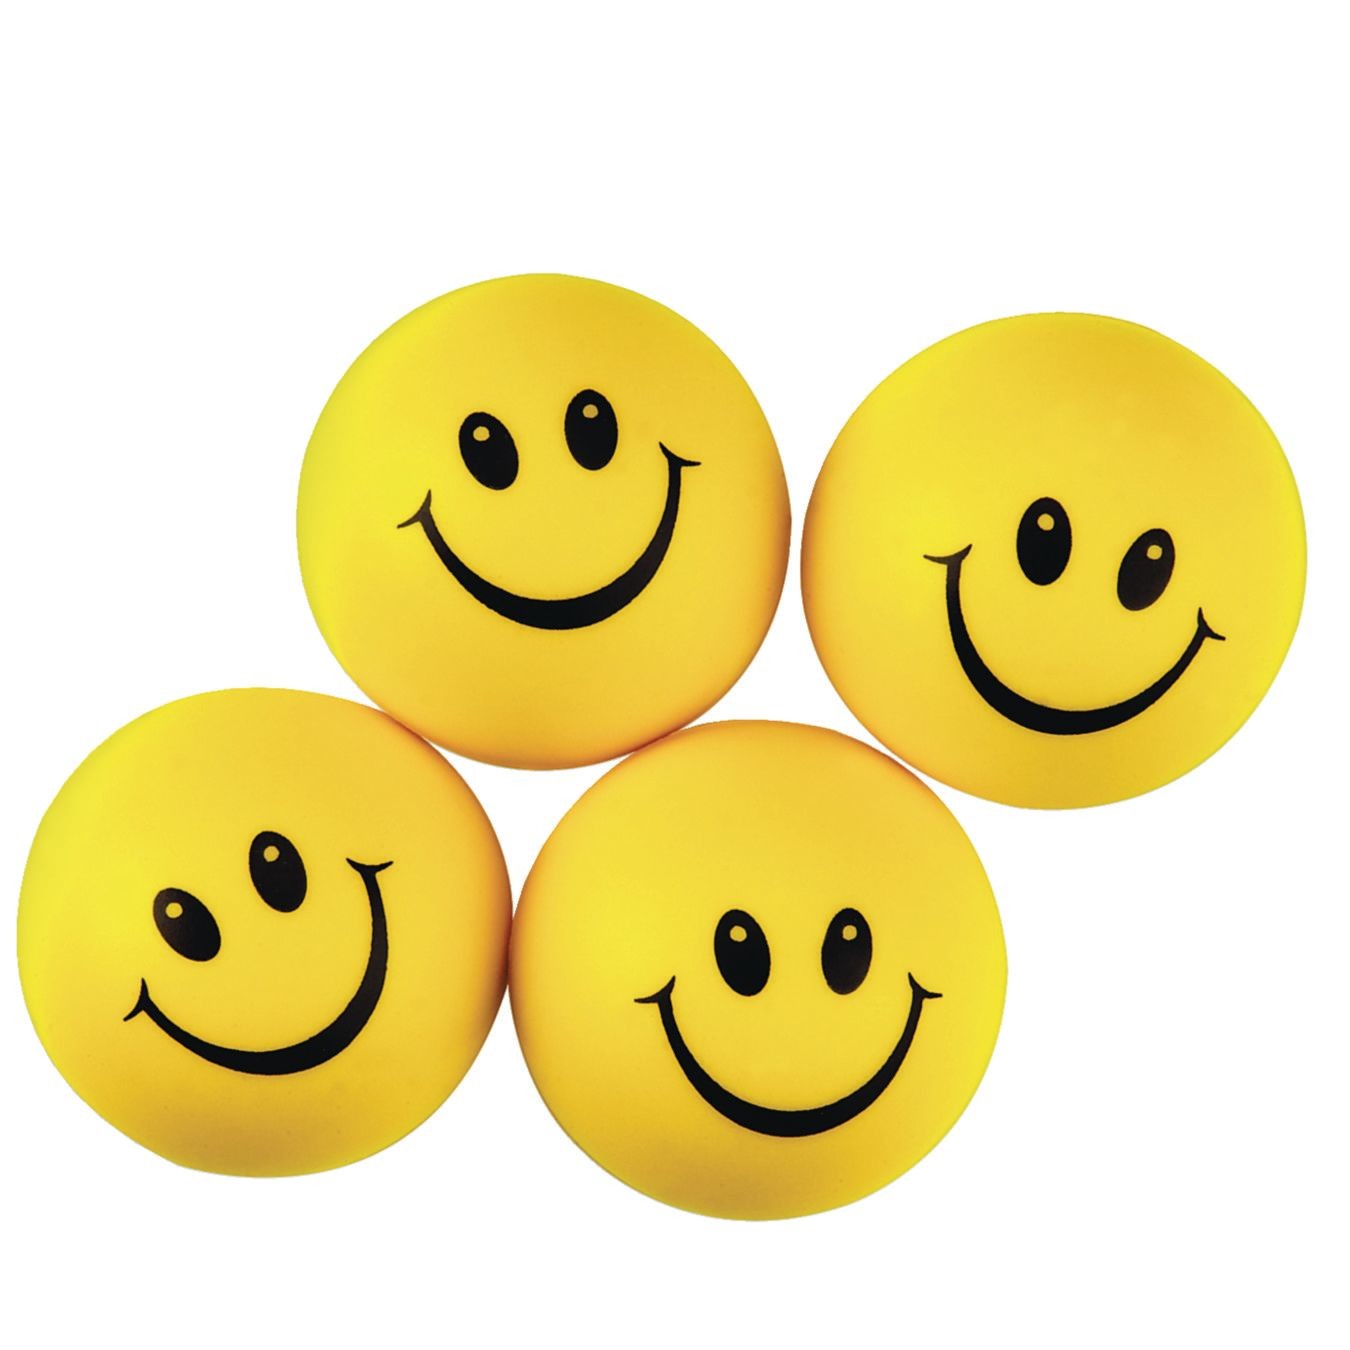 Details about   18 SMILE SMILEY FACE STRESS RELIEF BALLS 2" FOAM HAND THERAPY SQUEEZE TOY BALL 